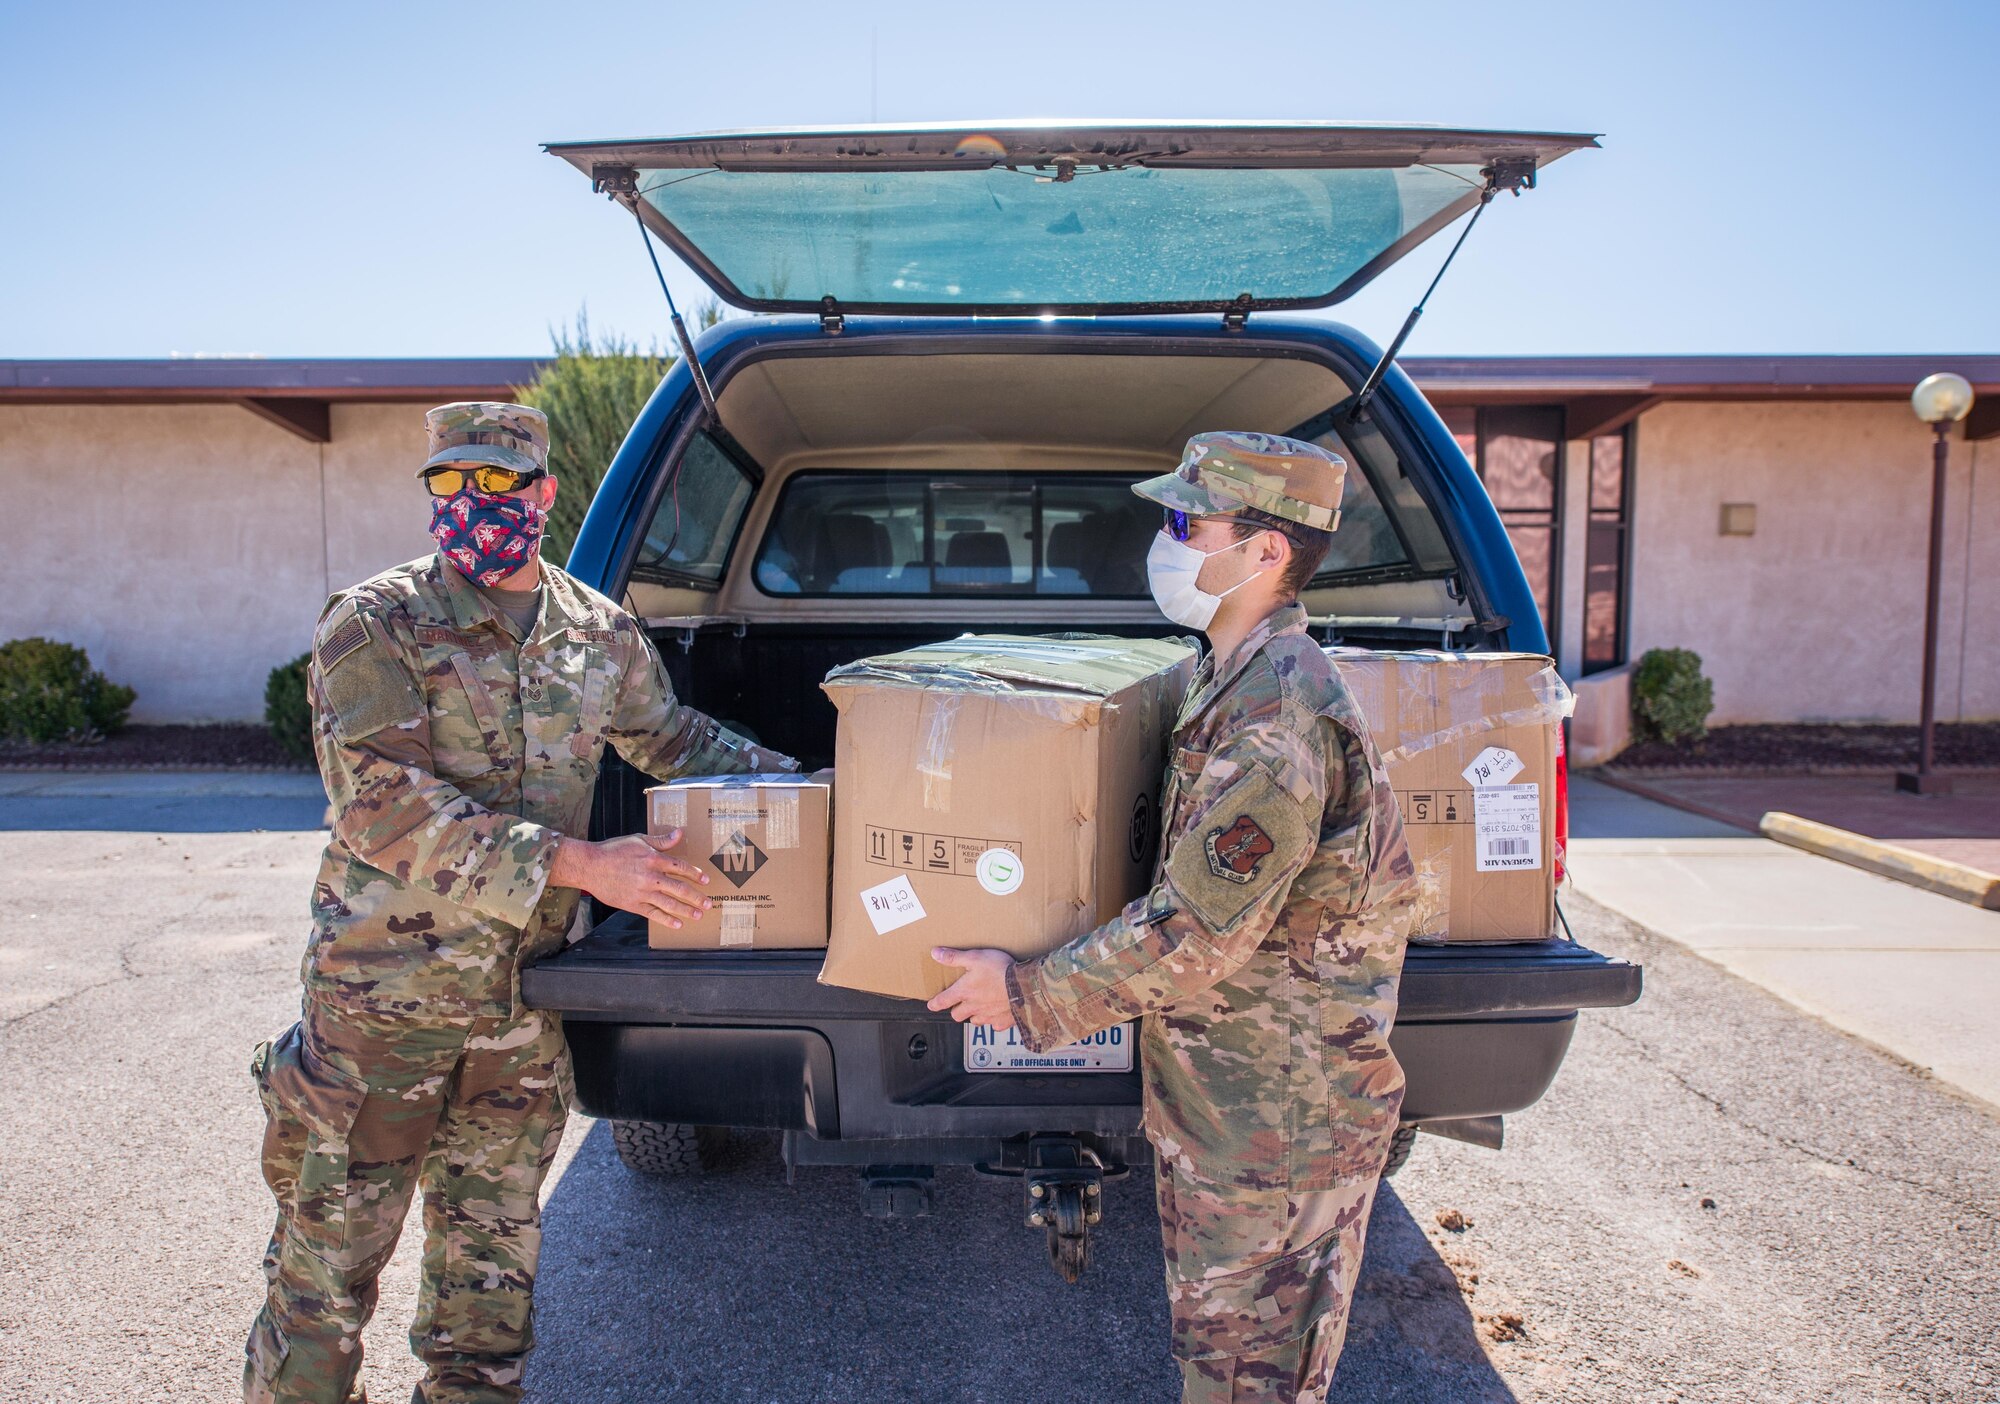 New Mexico Air National Guard Senior Airman Jason Quintana and Staff Sgt. Israel Martinez deliver personal protective equipment to Grants, New Mexico, to help support local communities.